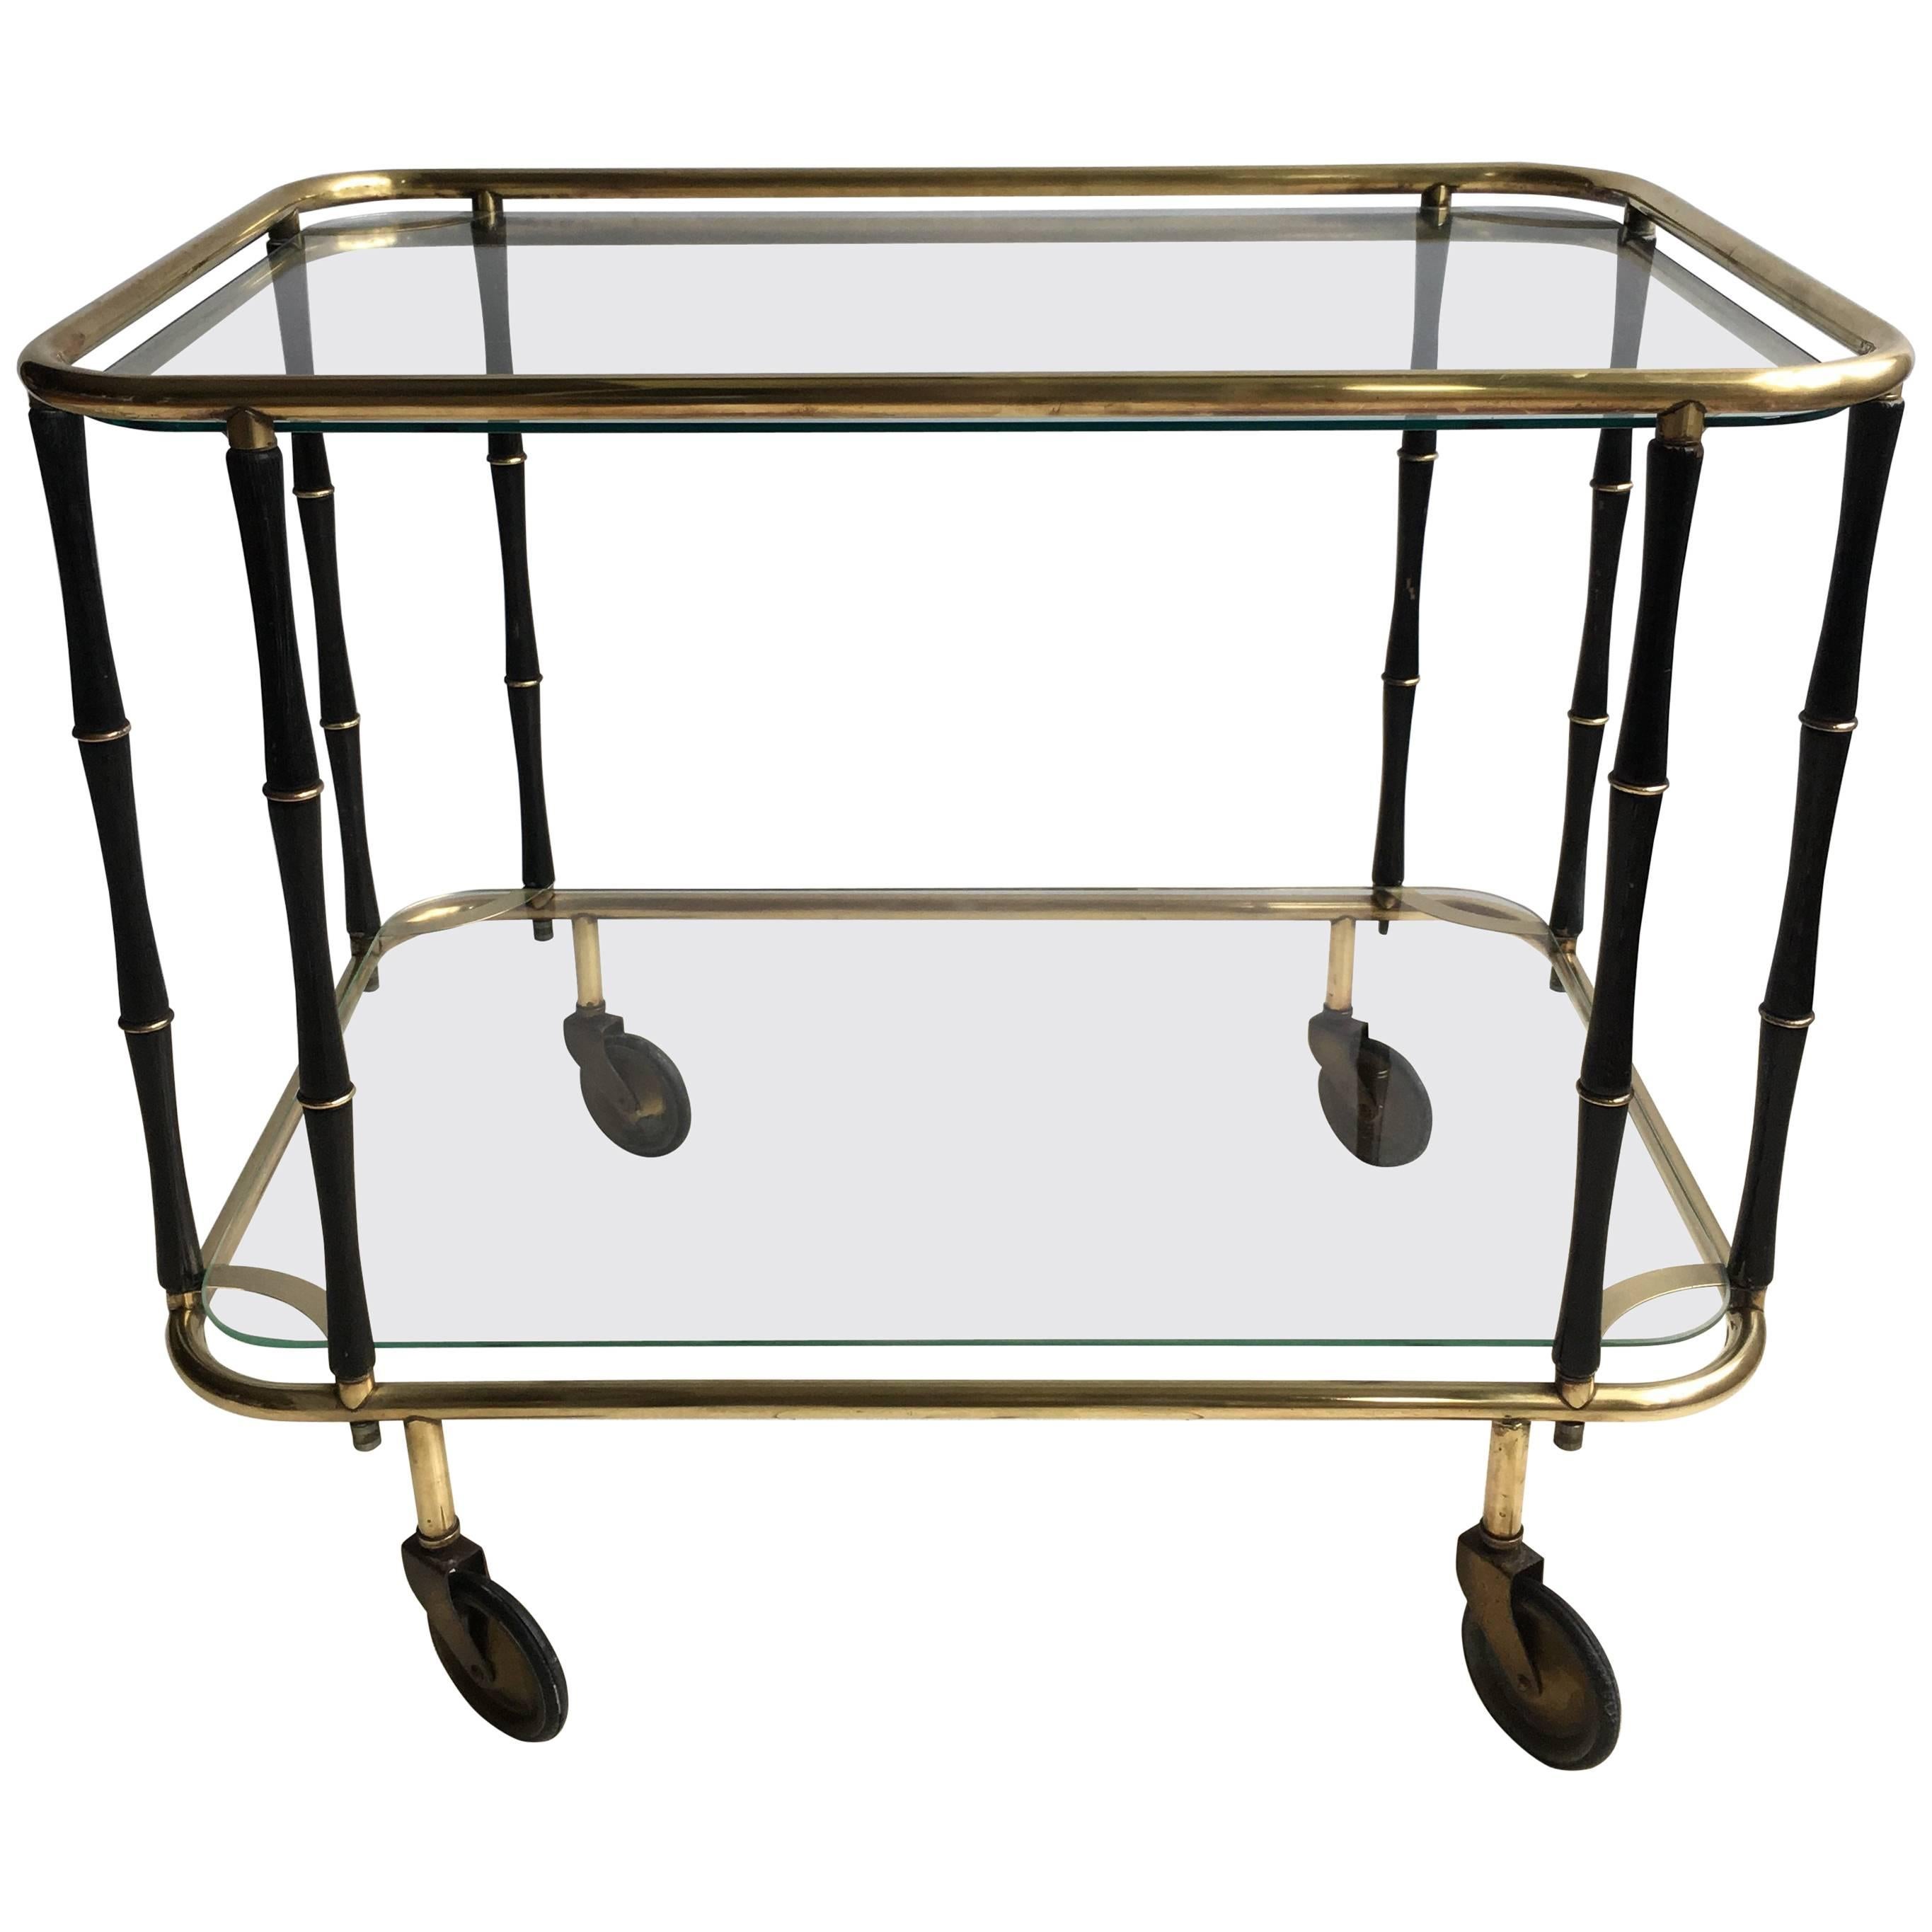 Midcentury Faux Bamboo and Brass Drinks Trolley/Bar Cart For Sale